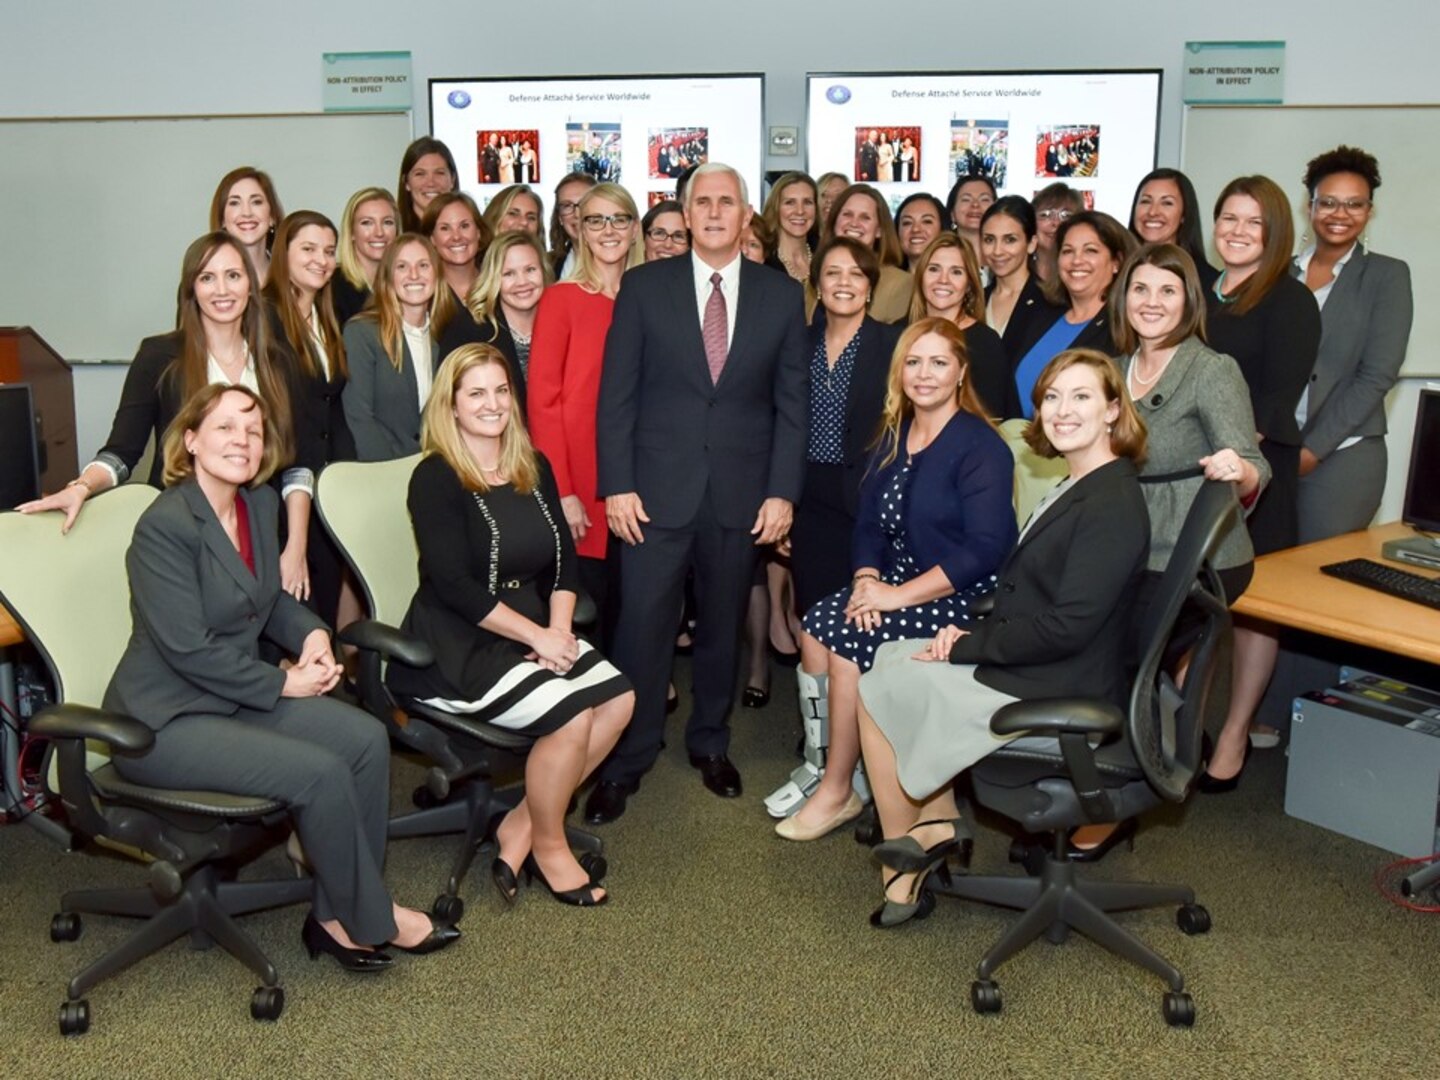 Vice President Mike Pence stands with attaché spouses participating in the Defense Intelligence Agency Defense Attaché program during his visit to DIA headquarters Nov. 6, at Joint Base Anacostia-Bolling in Washington, D.C.